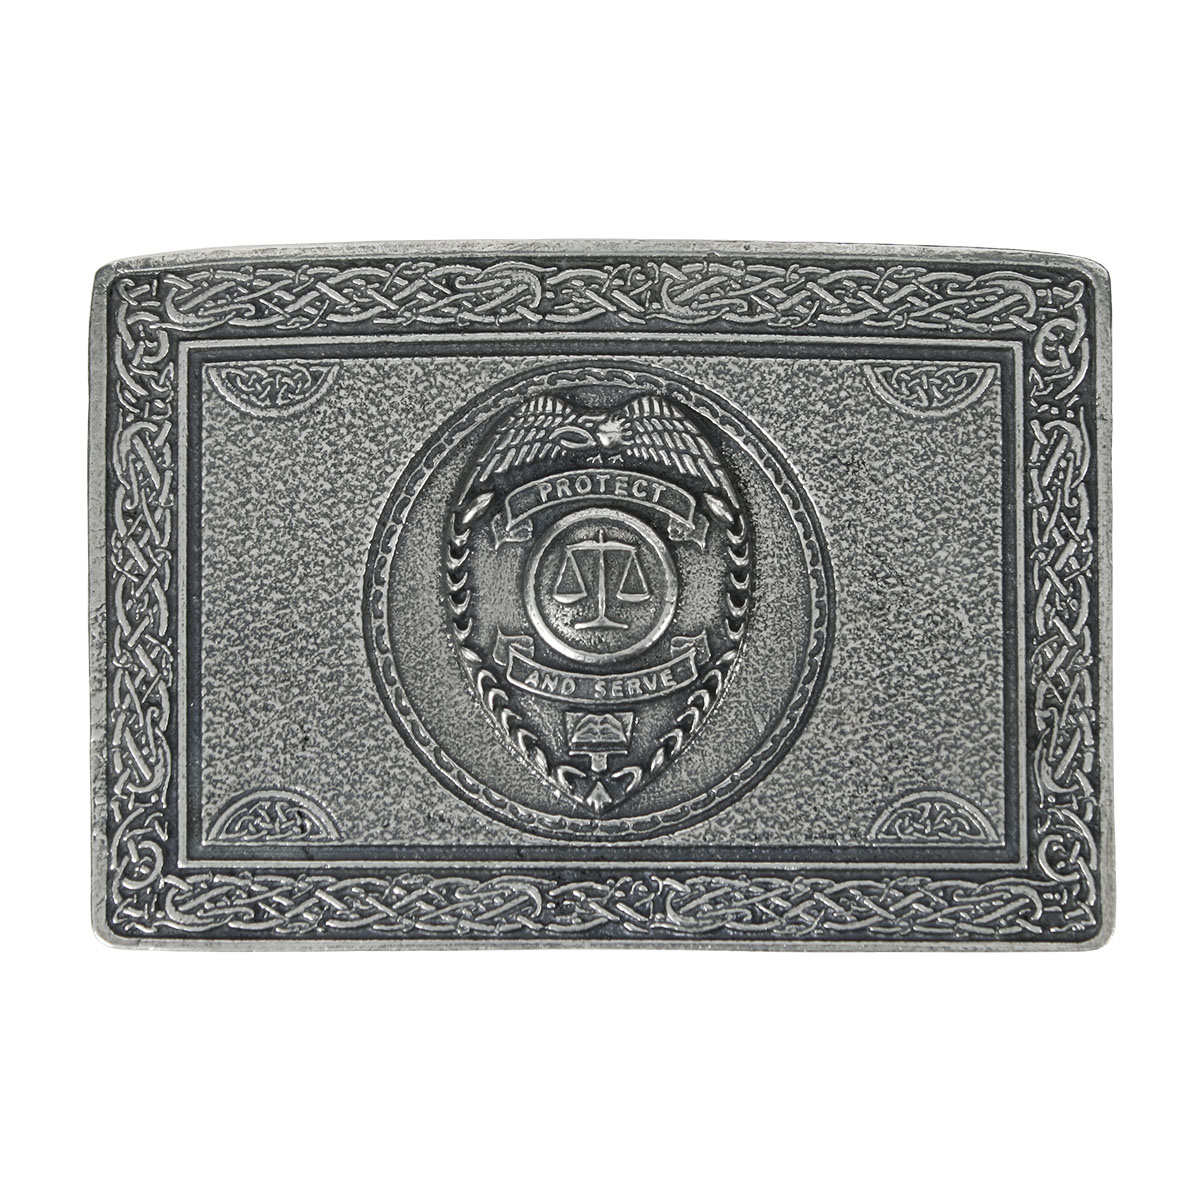 A silver Protect and Serve Law Enforcement Belt Buckle with a Celtic design, symbolizing protect and serve.